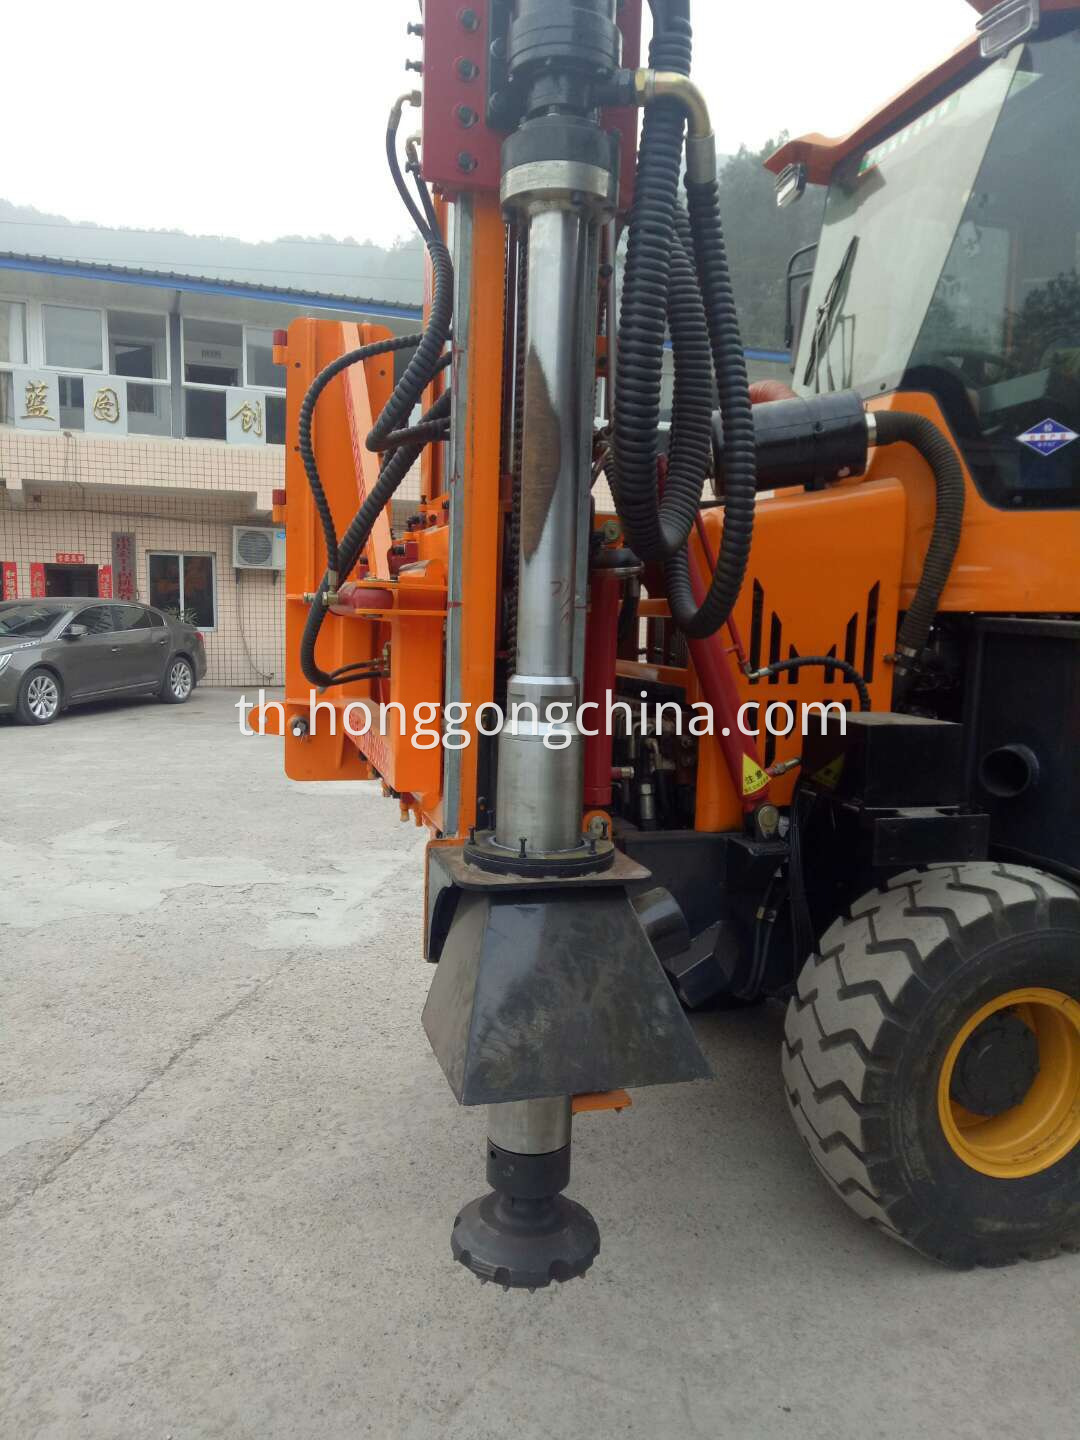 Competitive Hydraulic Diesel Hammer Pile Driver